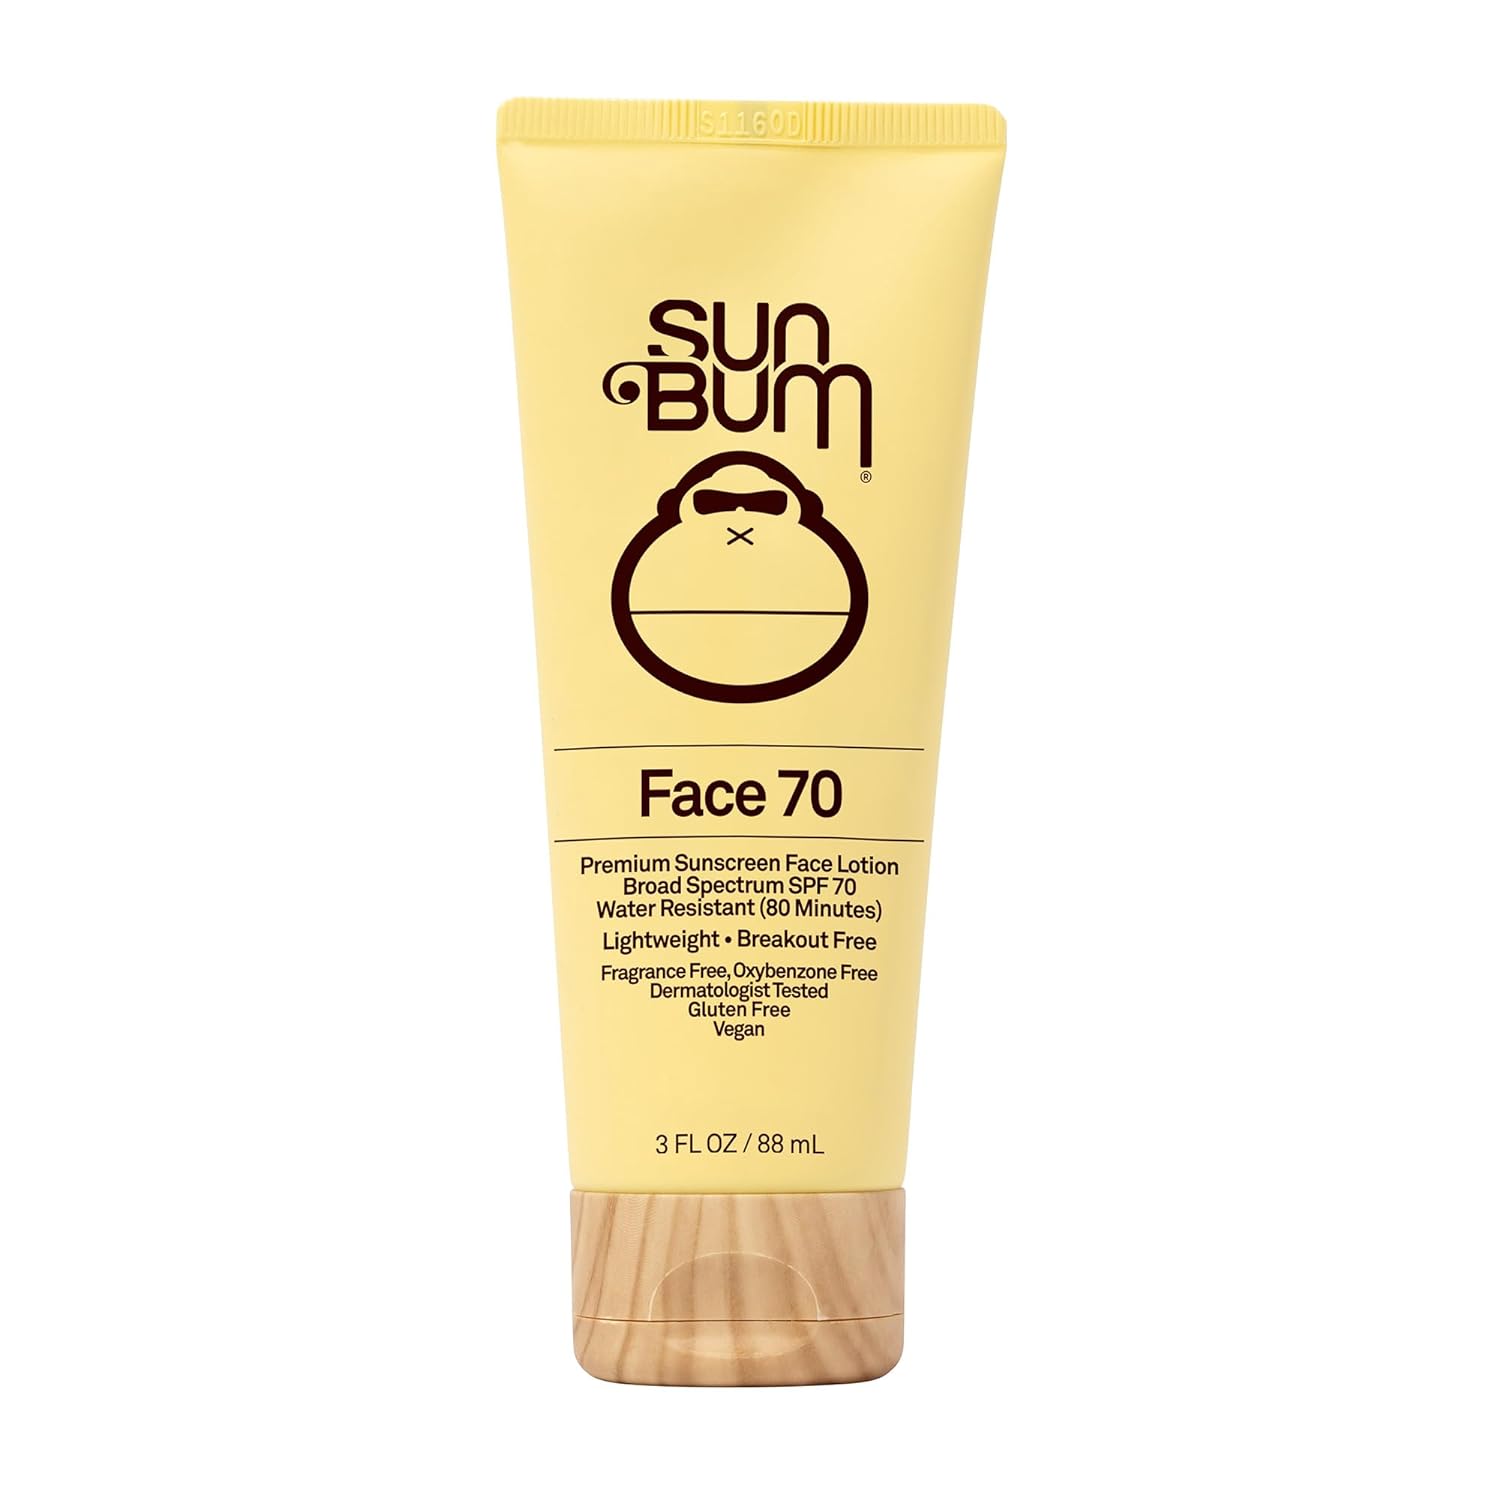 Sun Bum Original SPF 70 Sunscreen Face Lotion with Vitamin E | Vegan and Hawaii 104 Reef Act Compliant (Octinoxate & Oxybenzone Free) UVA/UVB Broad Spectrum Fragrance-Free Moisturizing |3oz